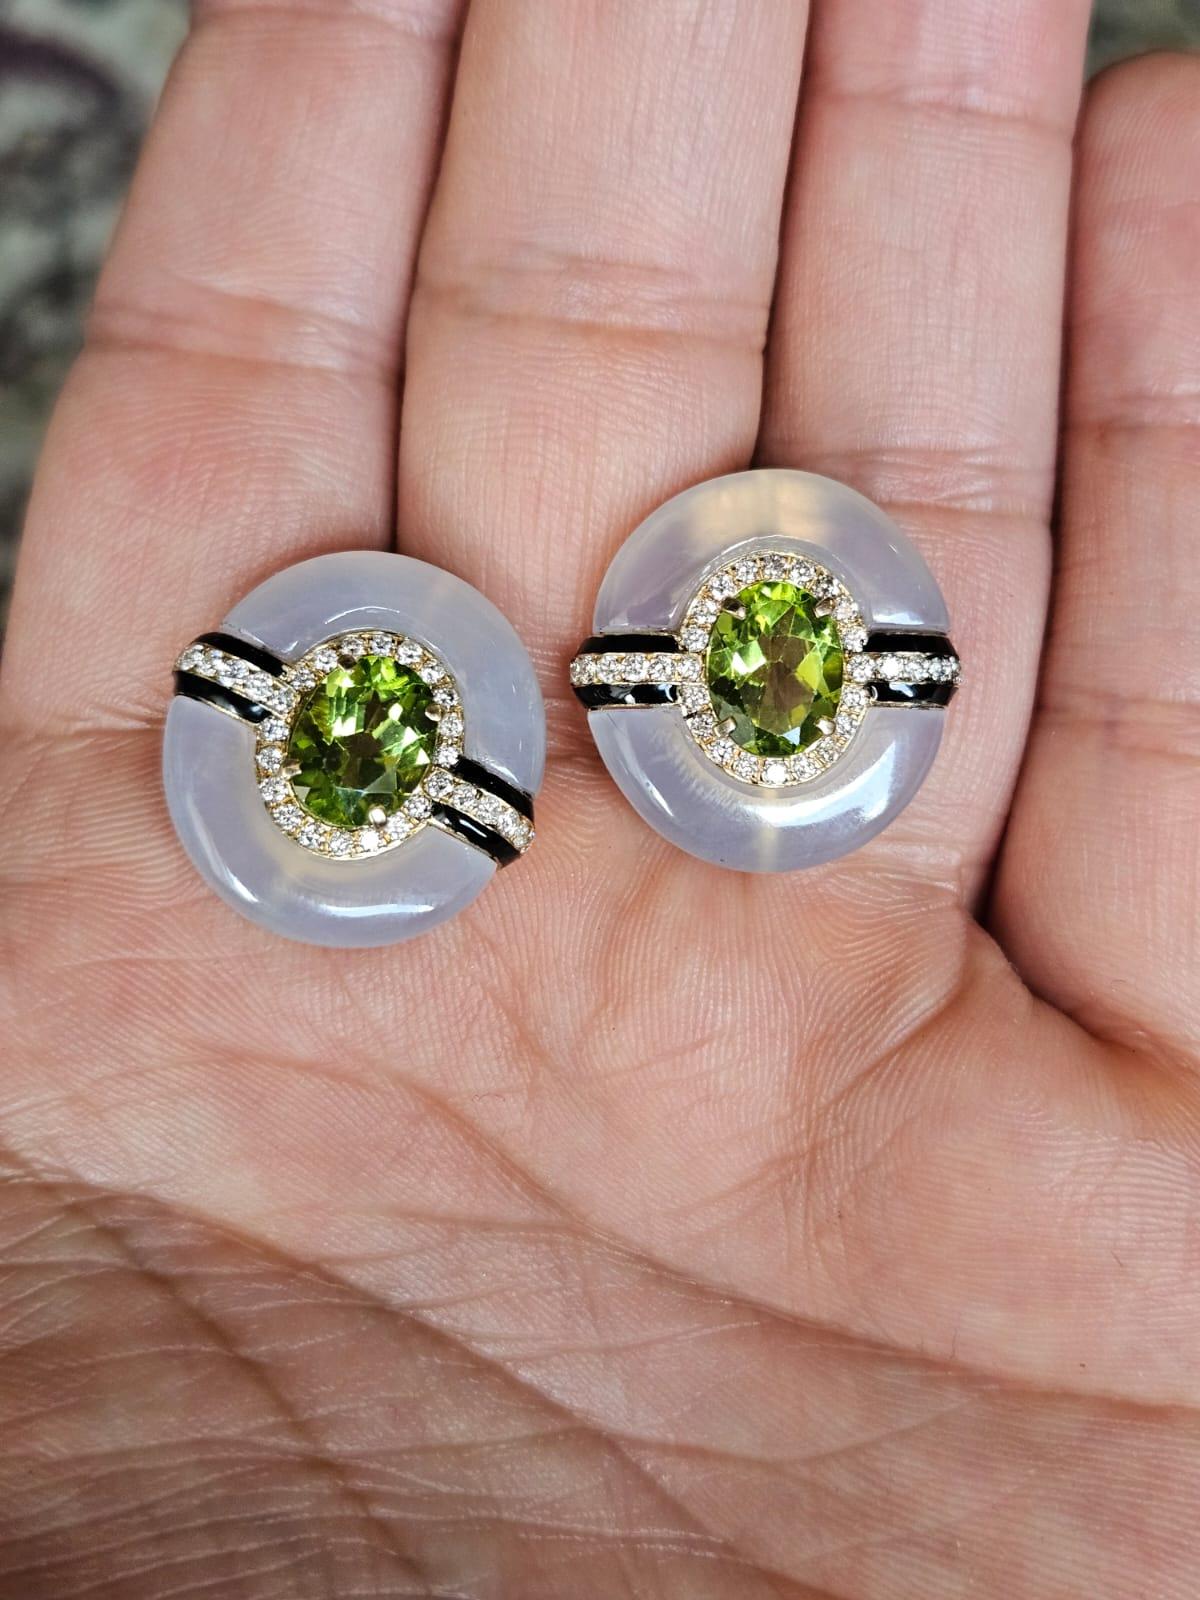 A very gorgeous and beautiful, Art Deco style, Peridot, Calcedony  & Black Onyx Stud Earrings set in 18K Yellow Gold & Diamonds. The weight of the Oval shaped Peridot is 3.55 carats. The weight of the Chalcedony is 14.99 carats. The Chalcedony is